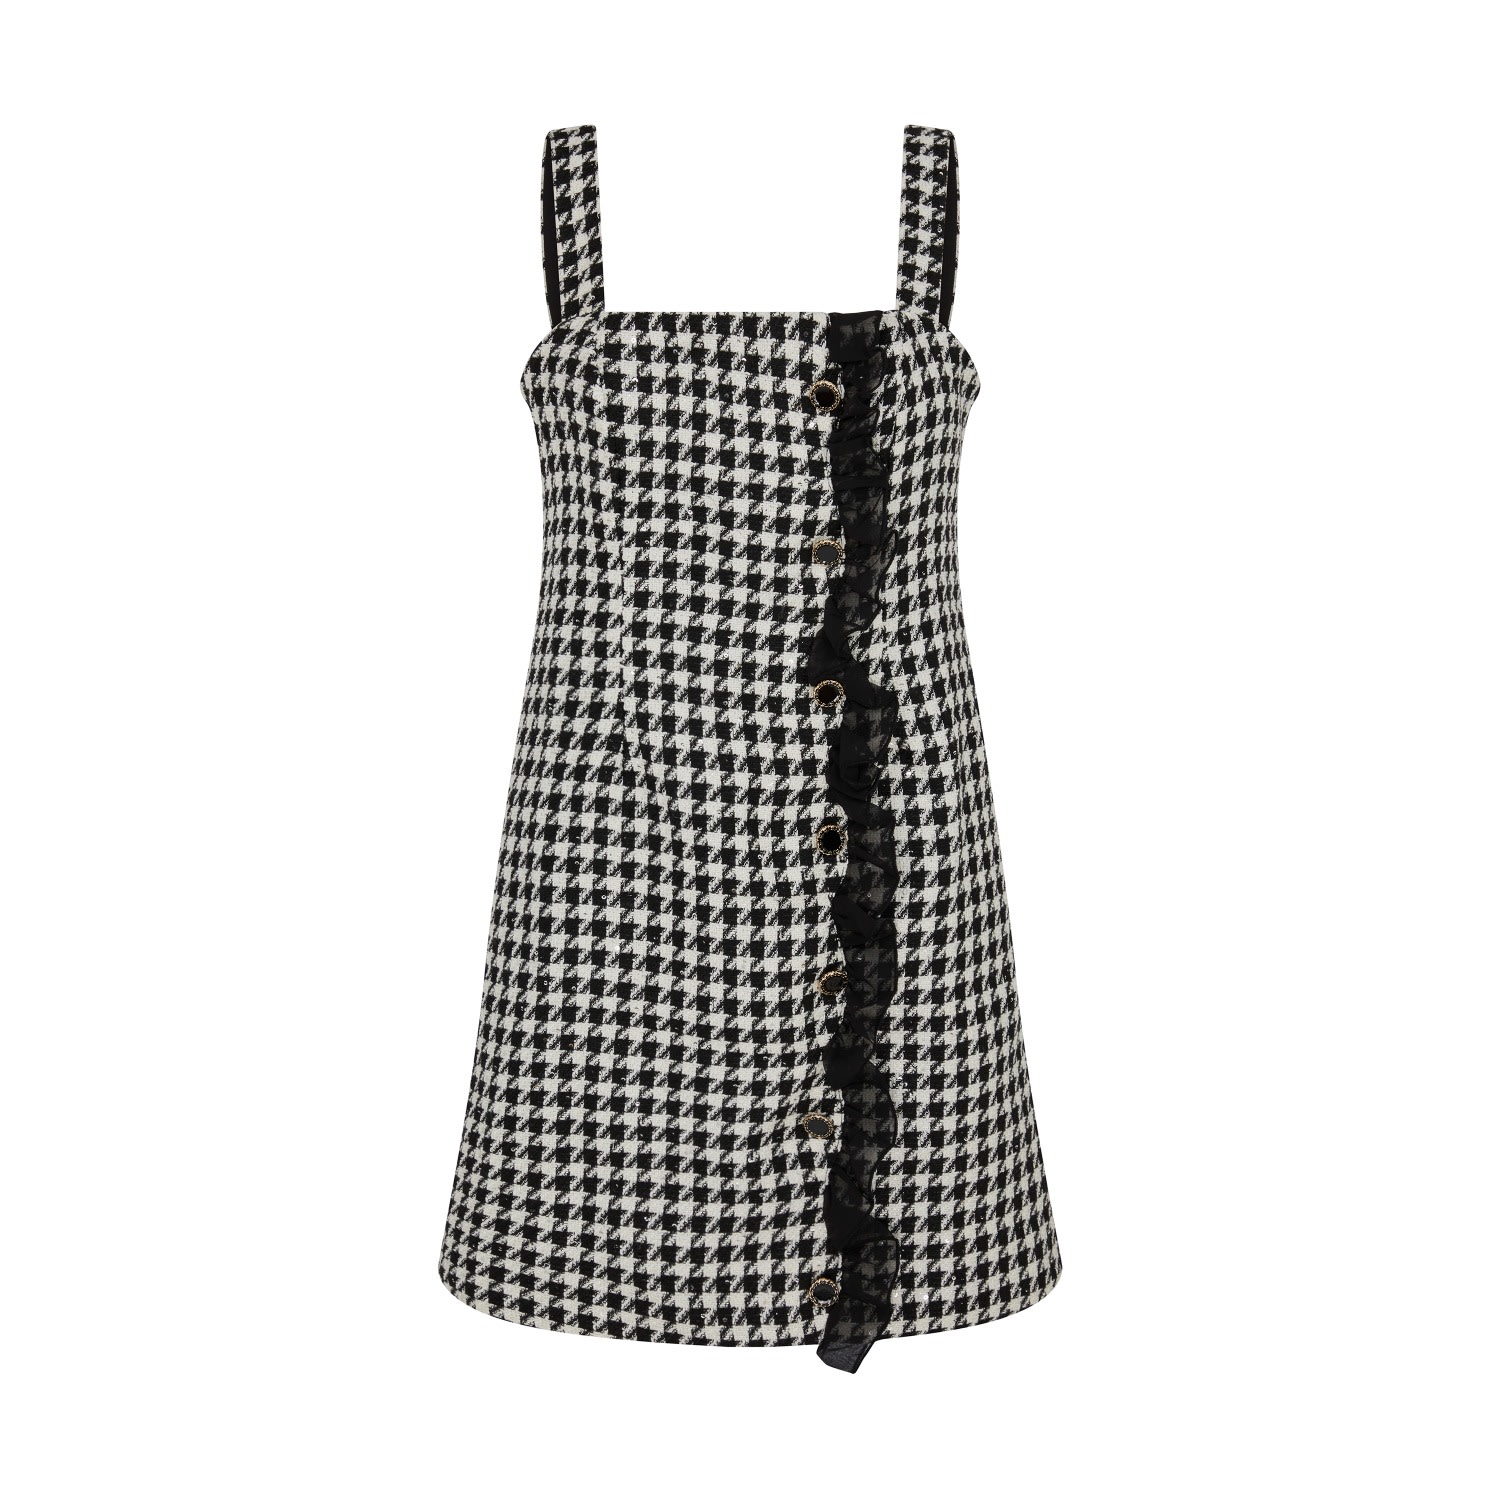 Women’s Black / White Sequined Houndstooth Bouclé-Knit Mini Dress In Black And White Medium Sour Figs